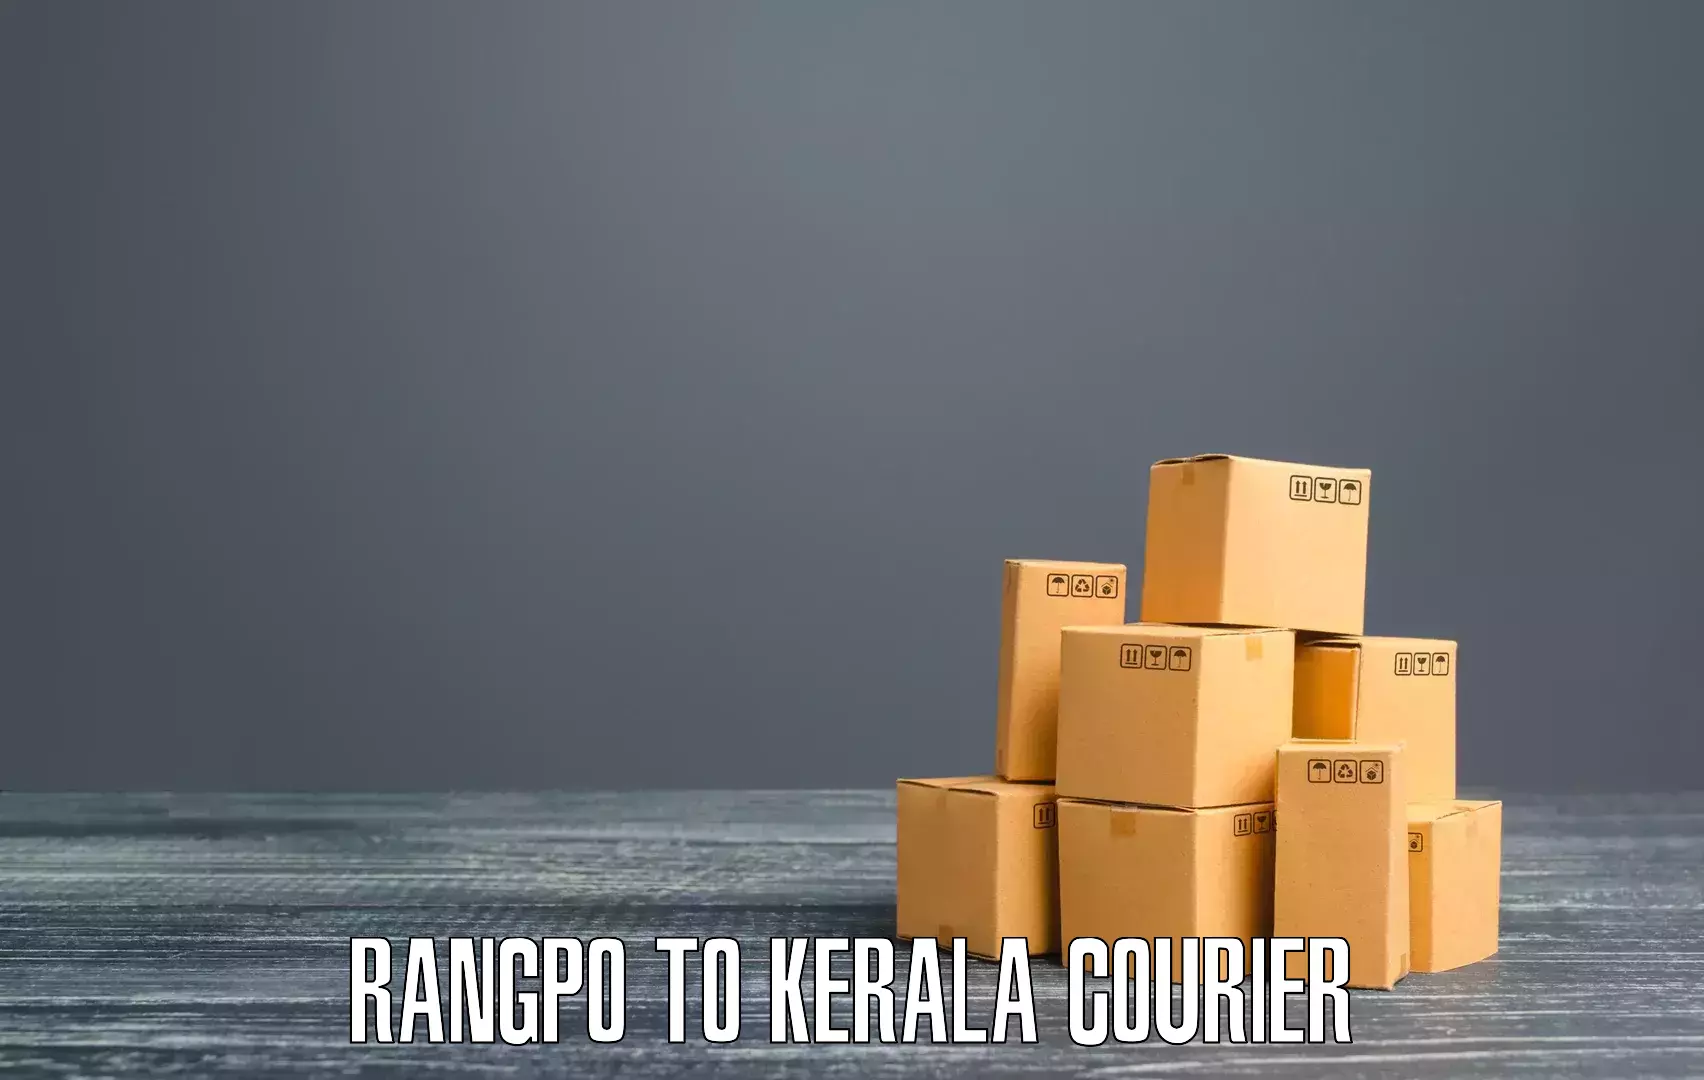 Easy access courier services Rangpo to Adimali